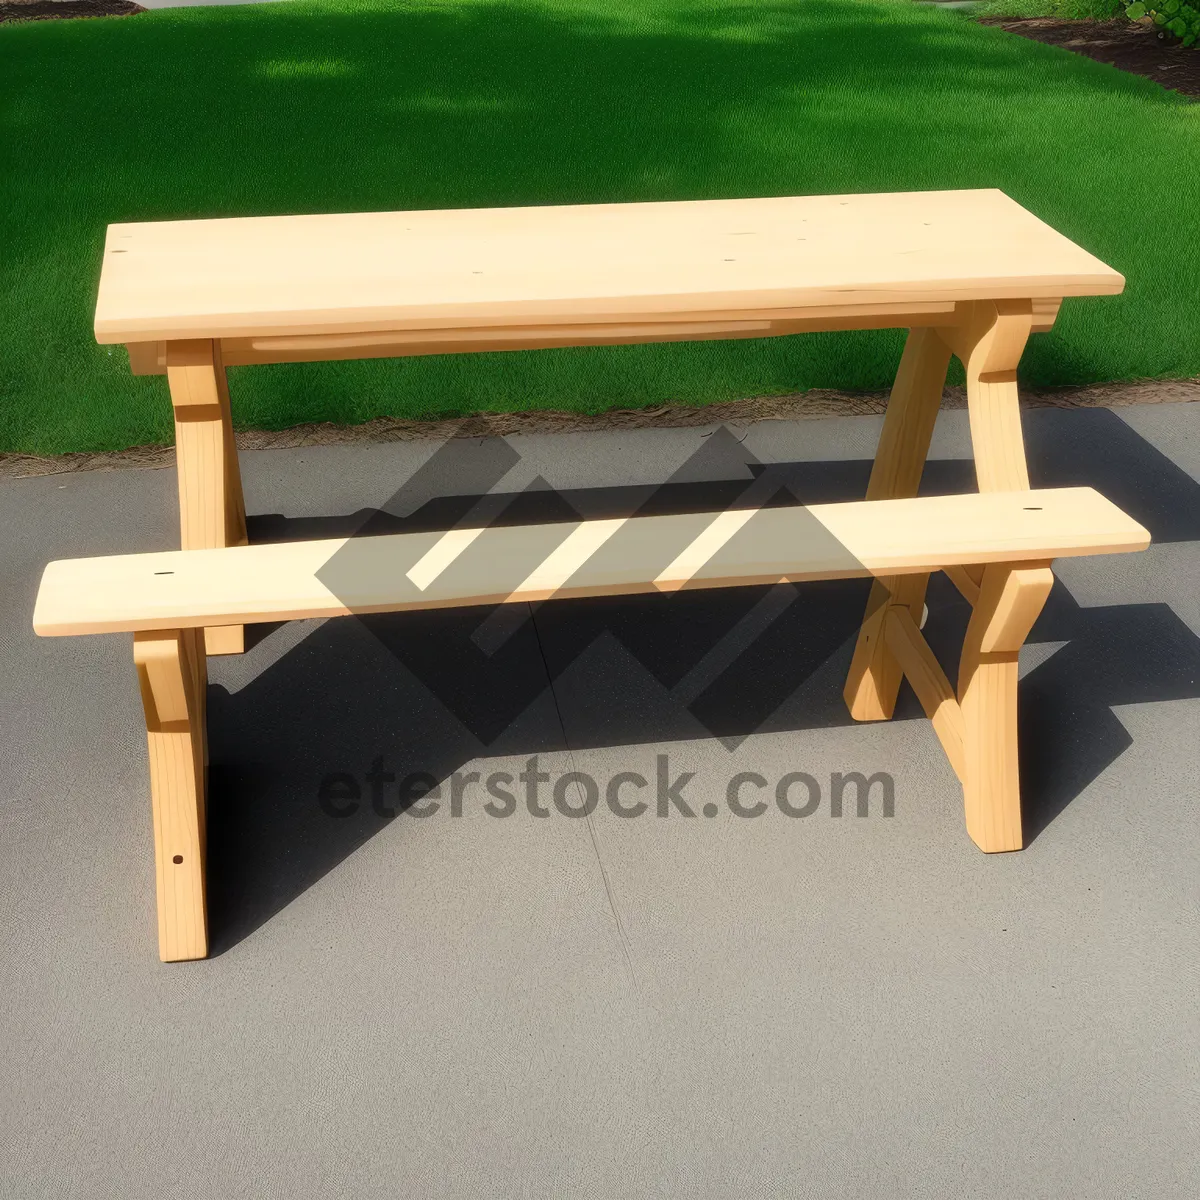 Picture of Wooden Footstool Seat - Versatile and Stylish Furniture